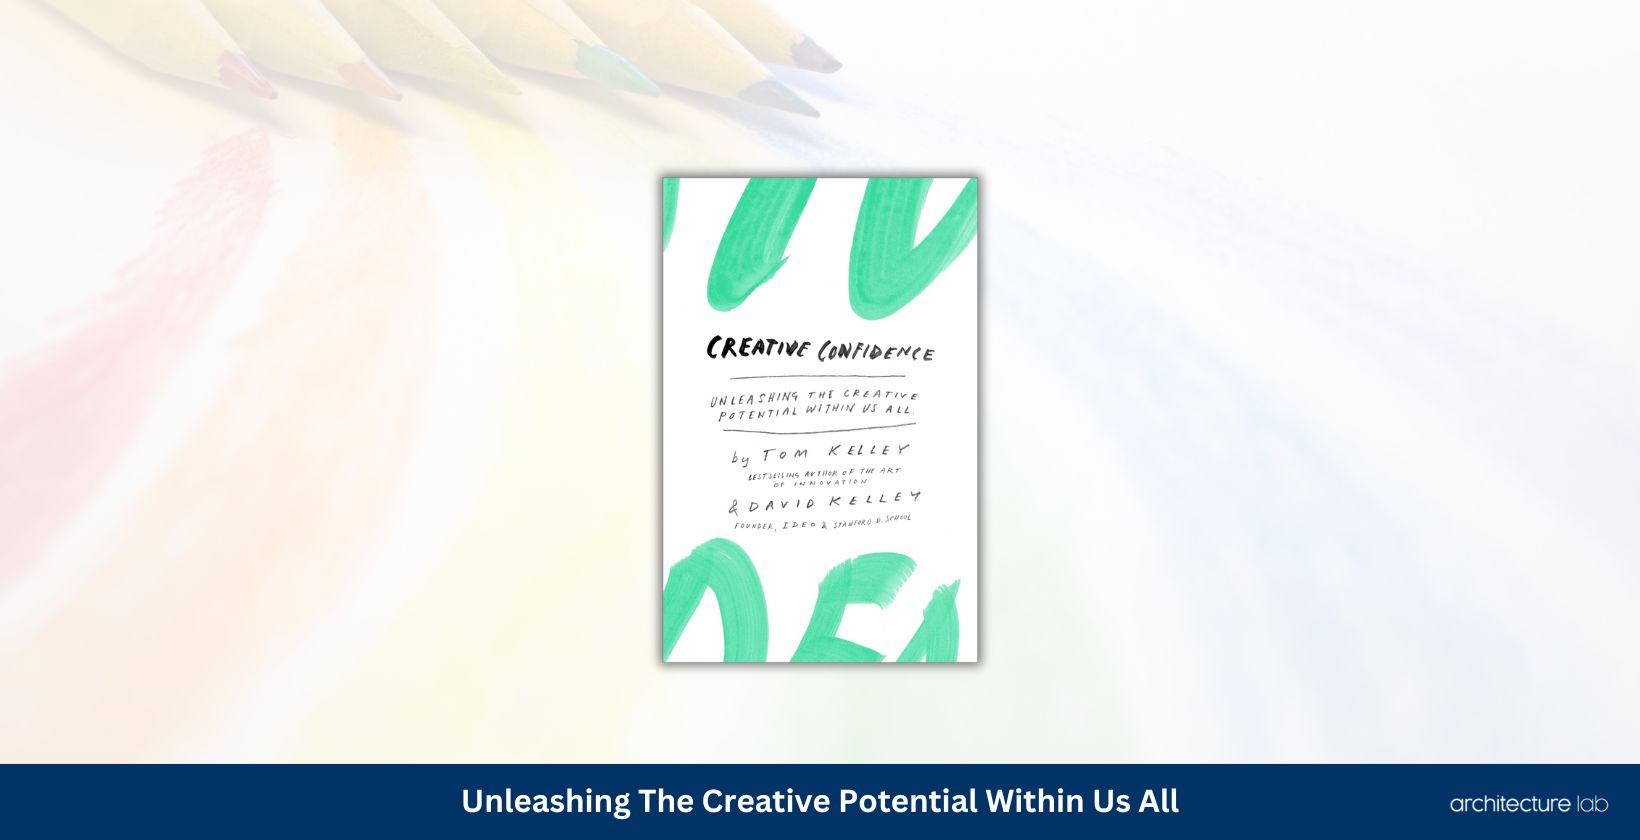 Unleashing the creative potential within us all